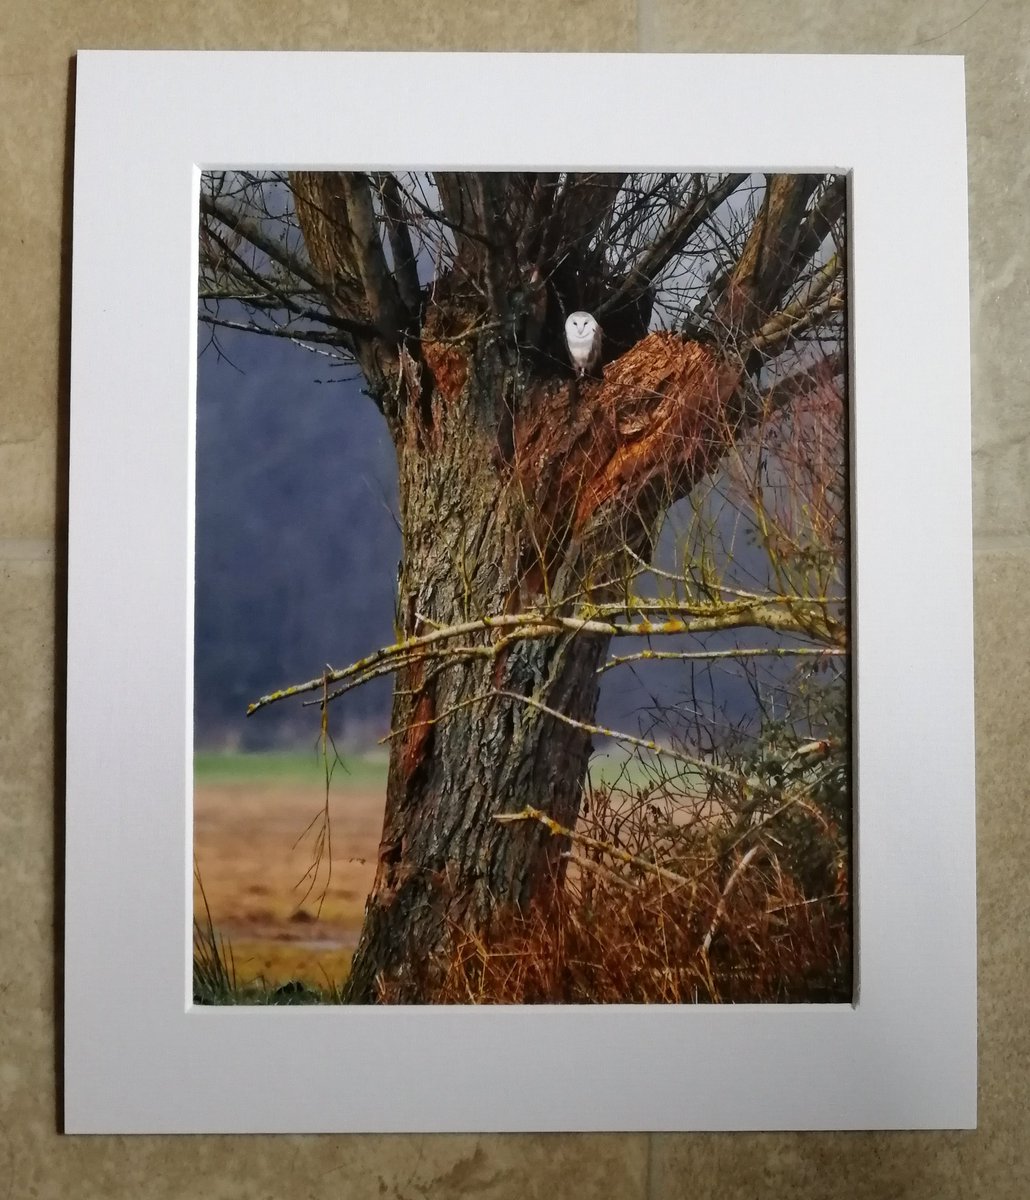 'The Watcher' 10x8 mounted print. One of my most popular photos, a Barn Owl watching me from an ancient tree on the Somerset Levels.  You can buy it here; https://www.carlbovis.com/product-page/the-watcher-barn-owl-10x8-mounted-print 